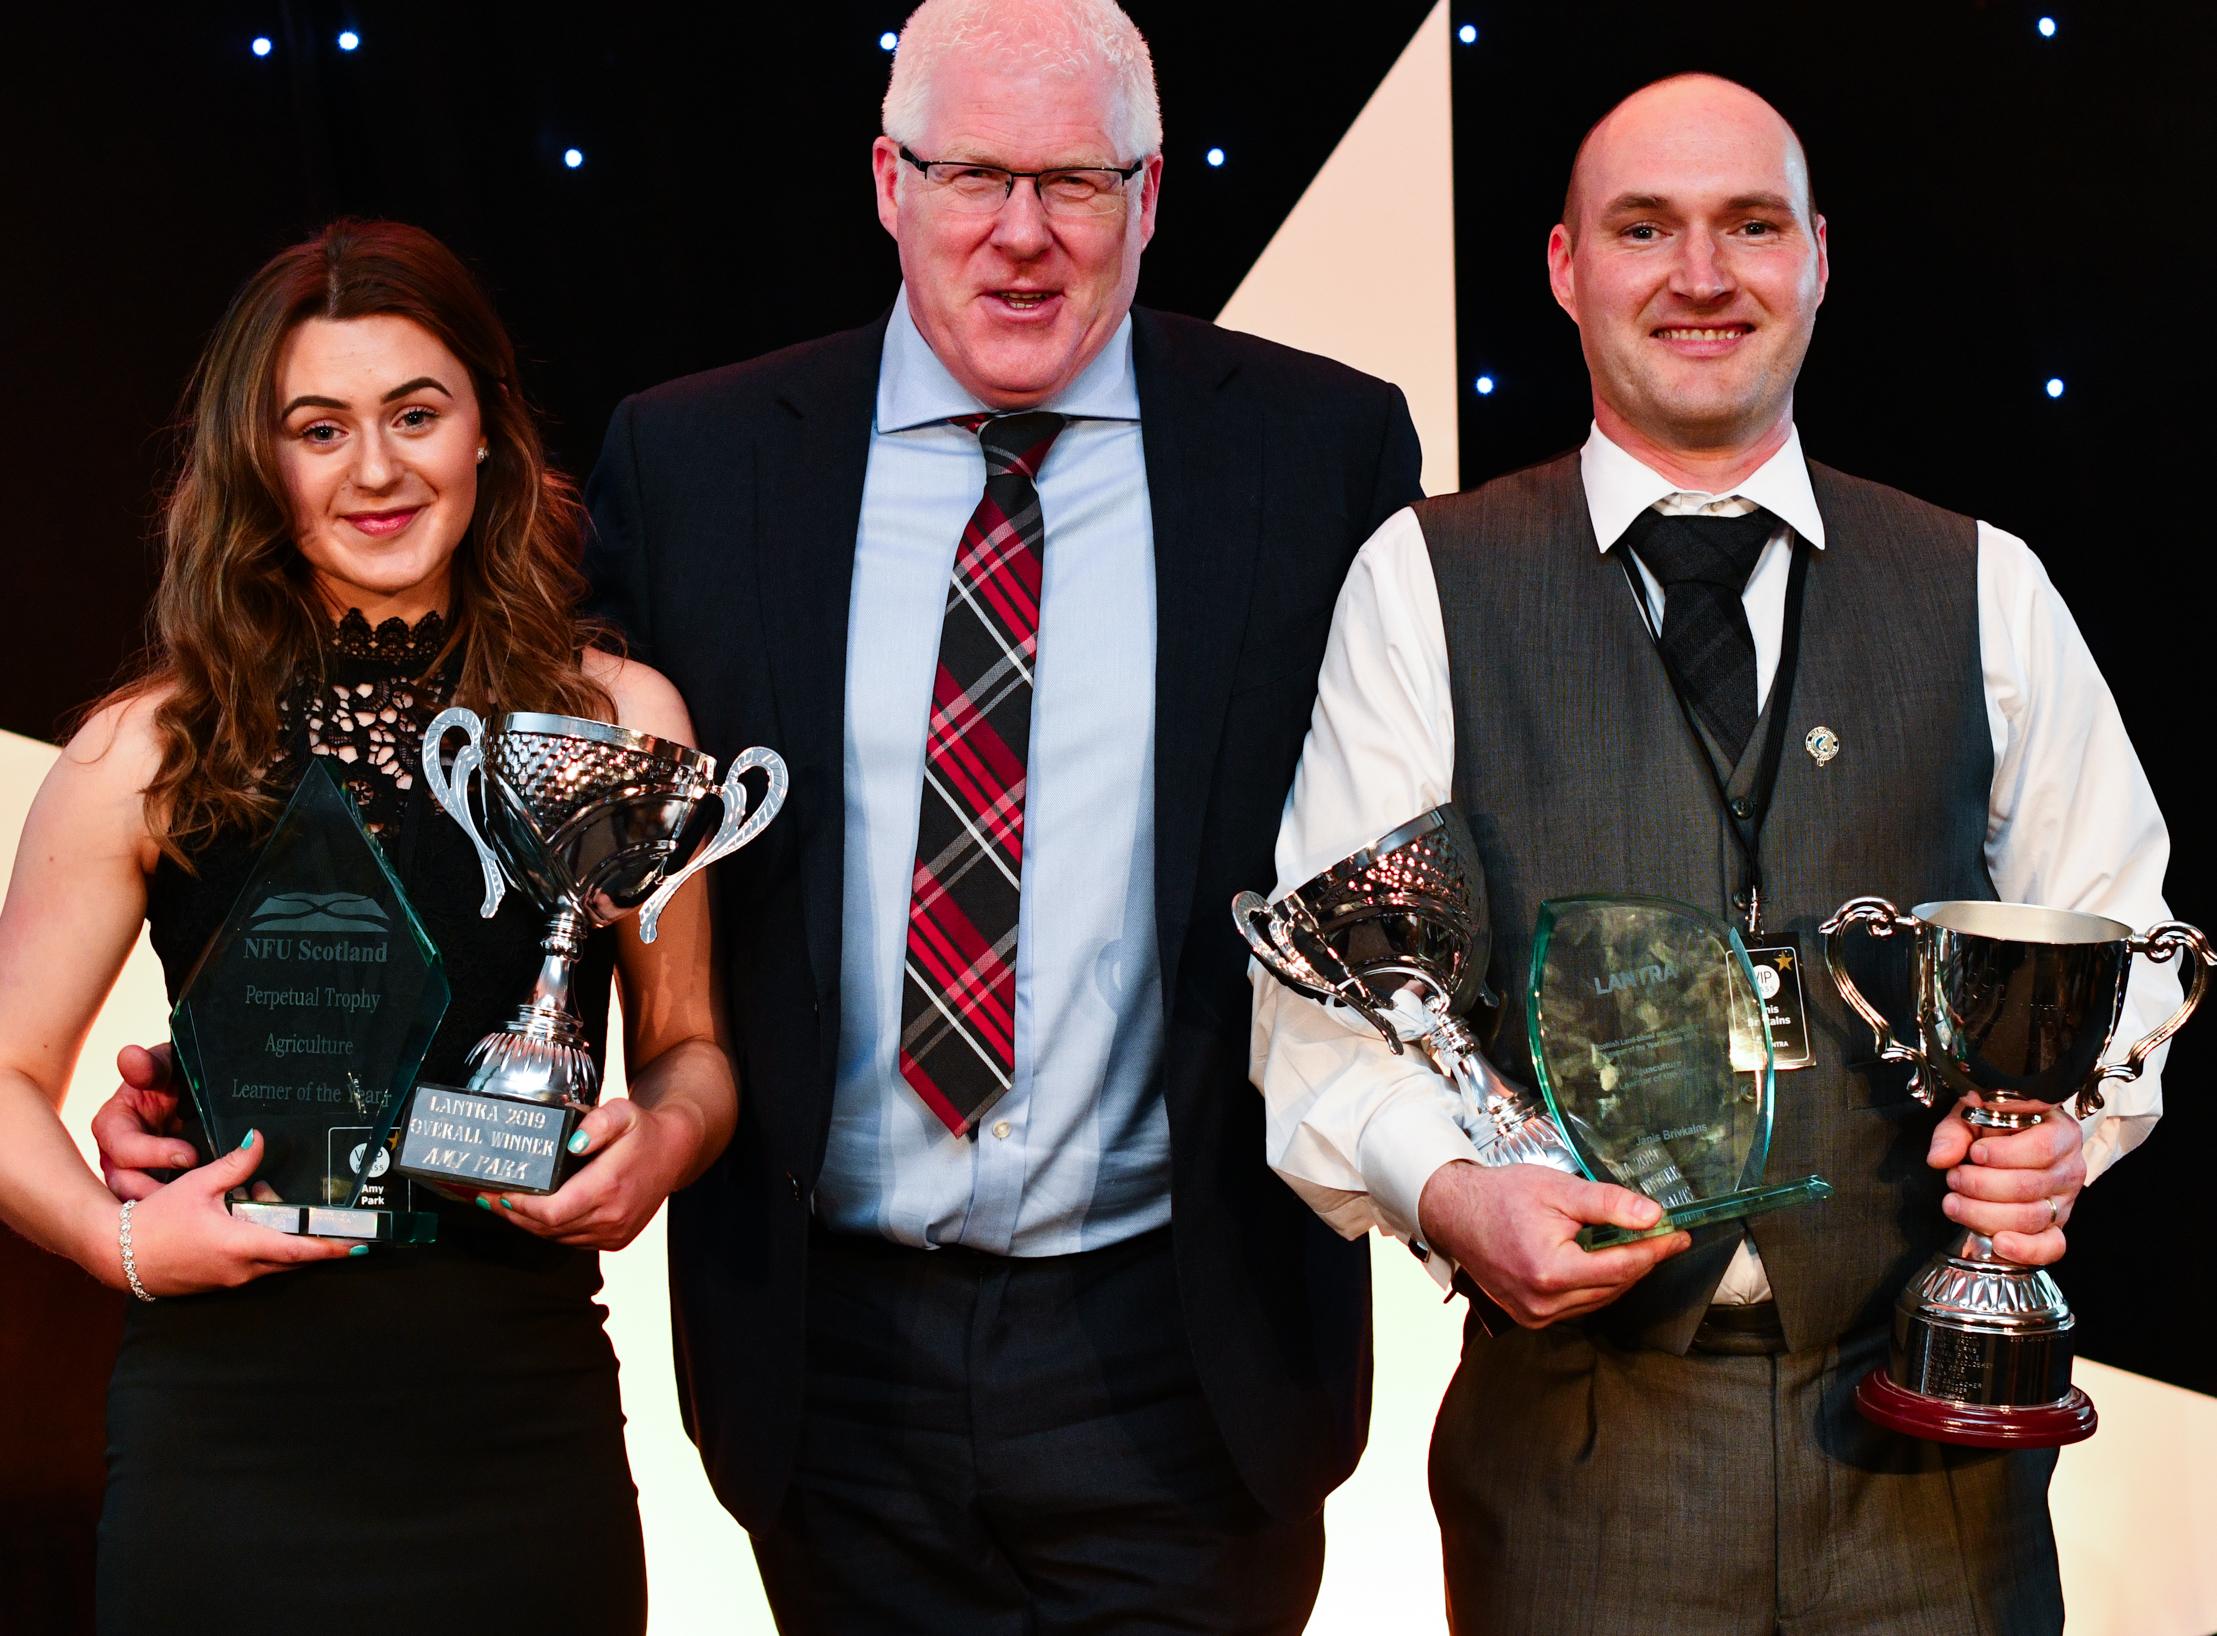 Joint overal learners of the year from Lantra Scotland event